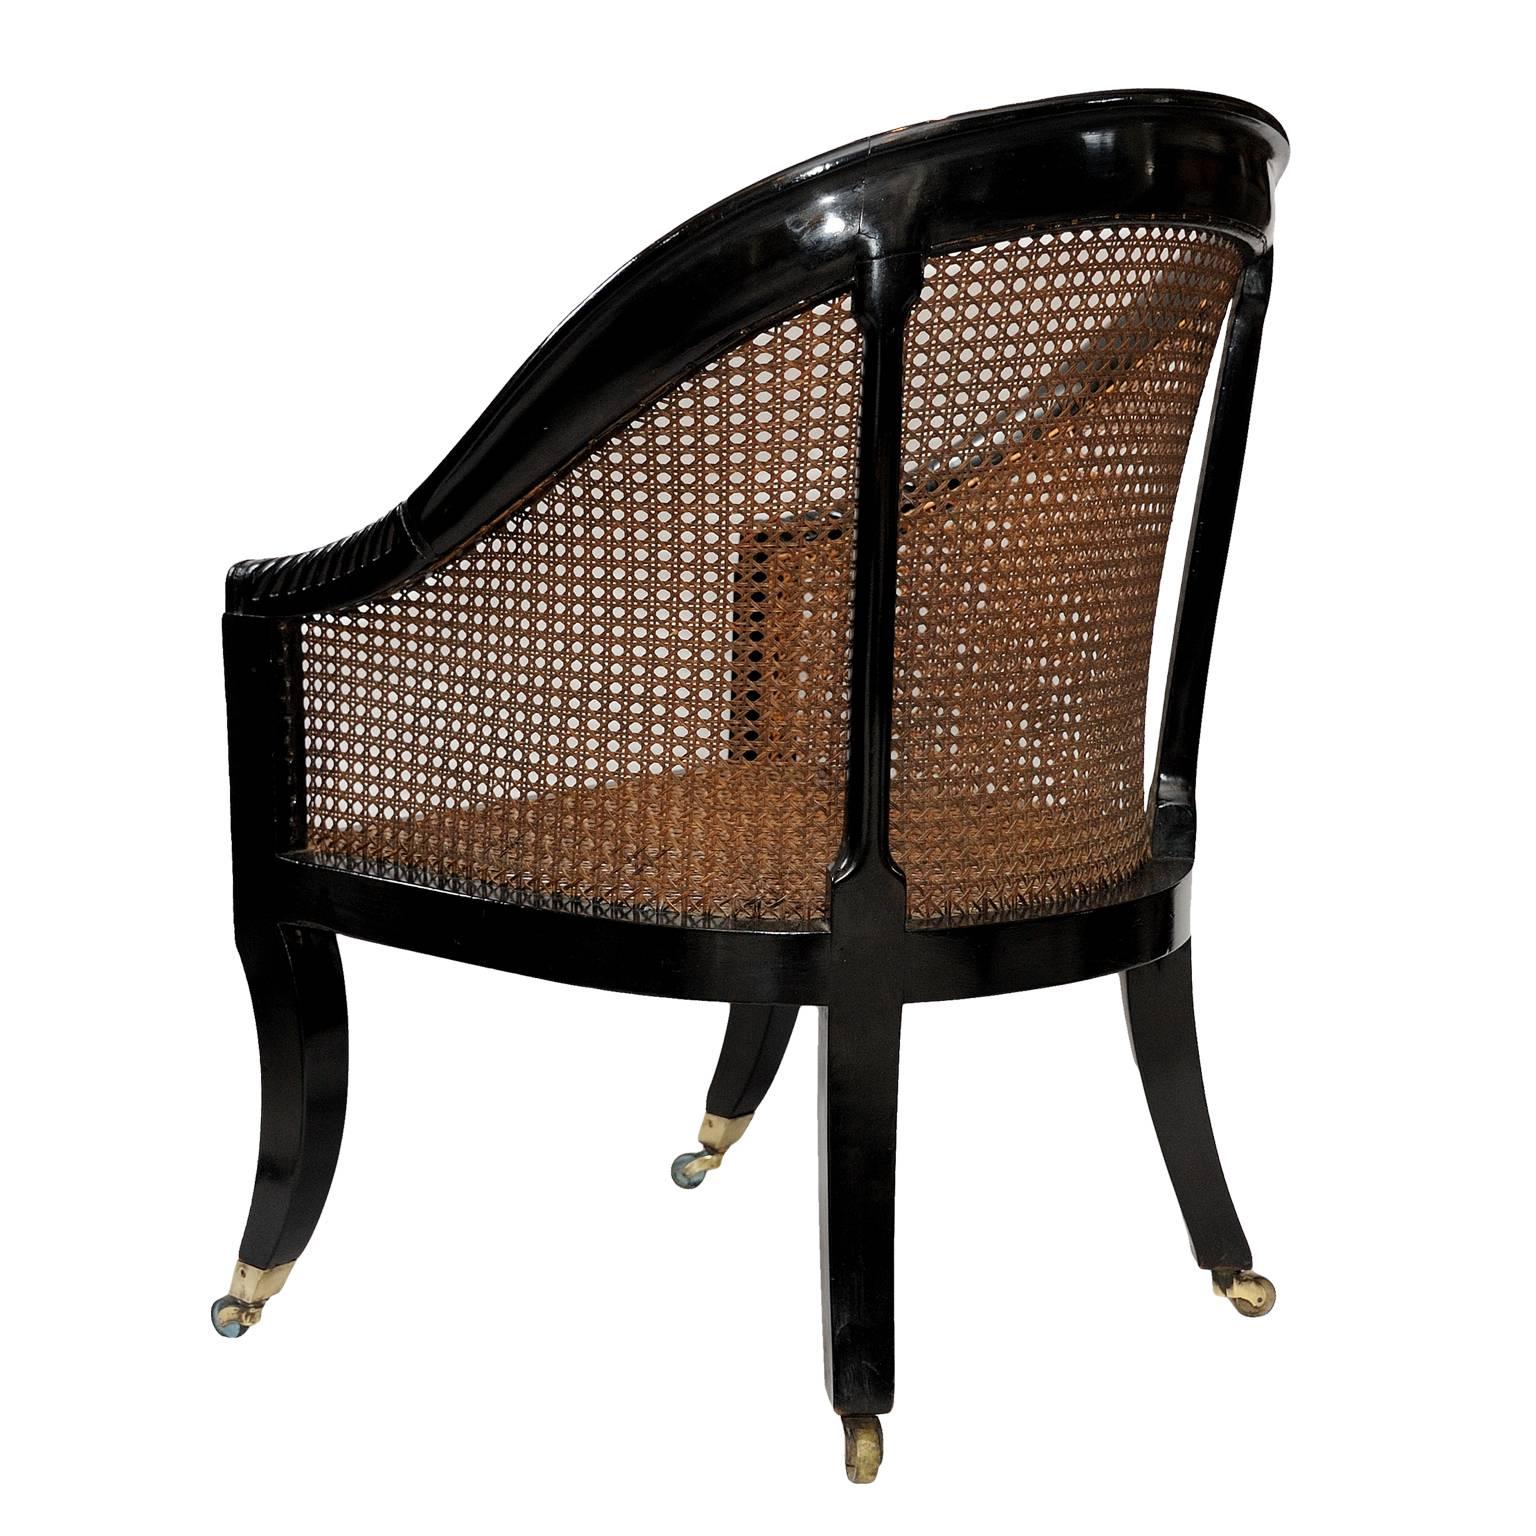 Caning English Early 19th Century Regency Ebonized Library Chair, circa 1810 For Sale